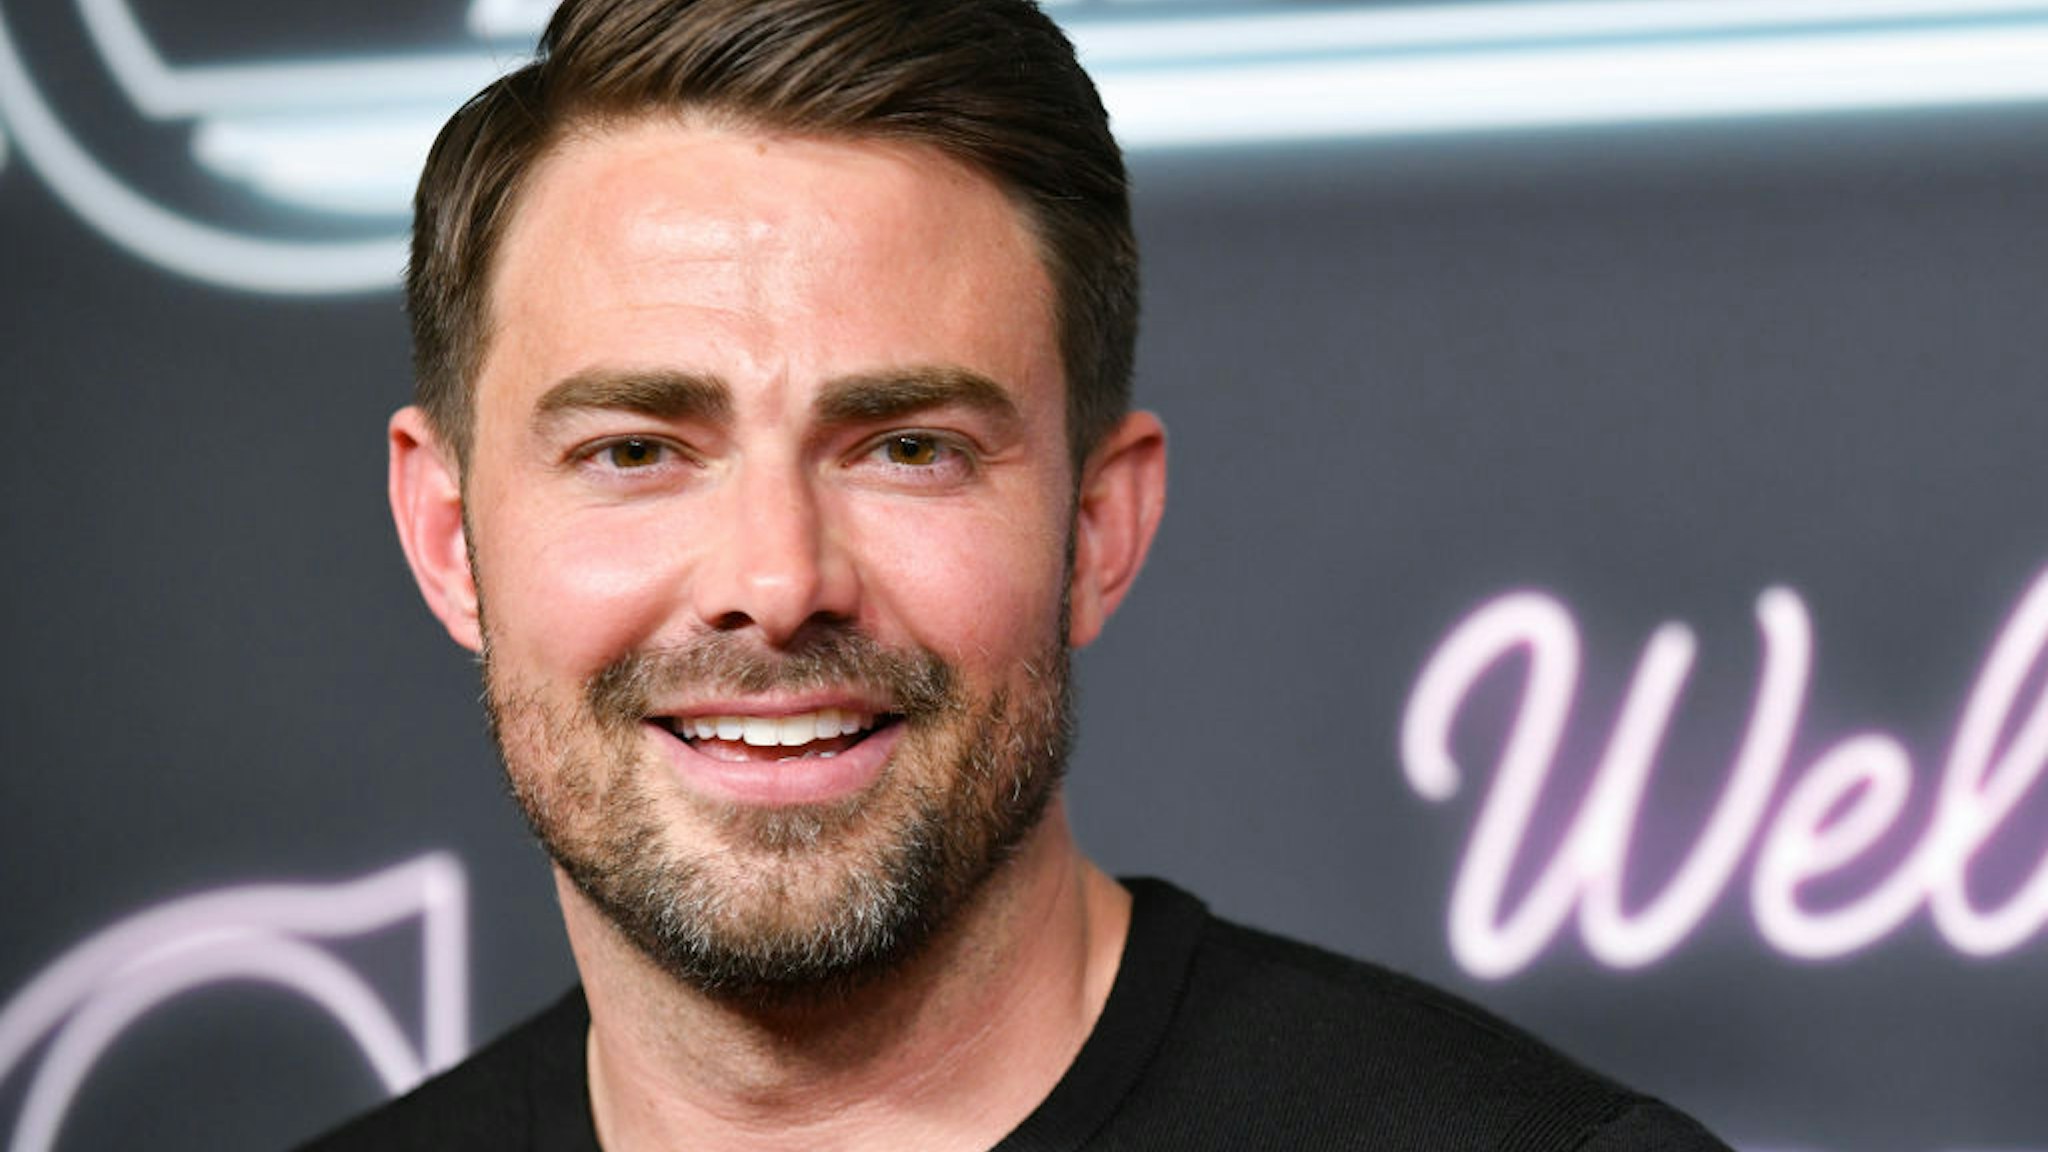 WEST HOLLYWOOD, CALIFORNIA - NOVEMBER 15: Jonathan Bennett attends the Los Angeles premiere of Hulu's "Welcome to Chippendales" at Pacific Design Center on November 15, 2022 in West Hollywood, California. (Photo by Rodin Eckenroth/Getty Images)